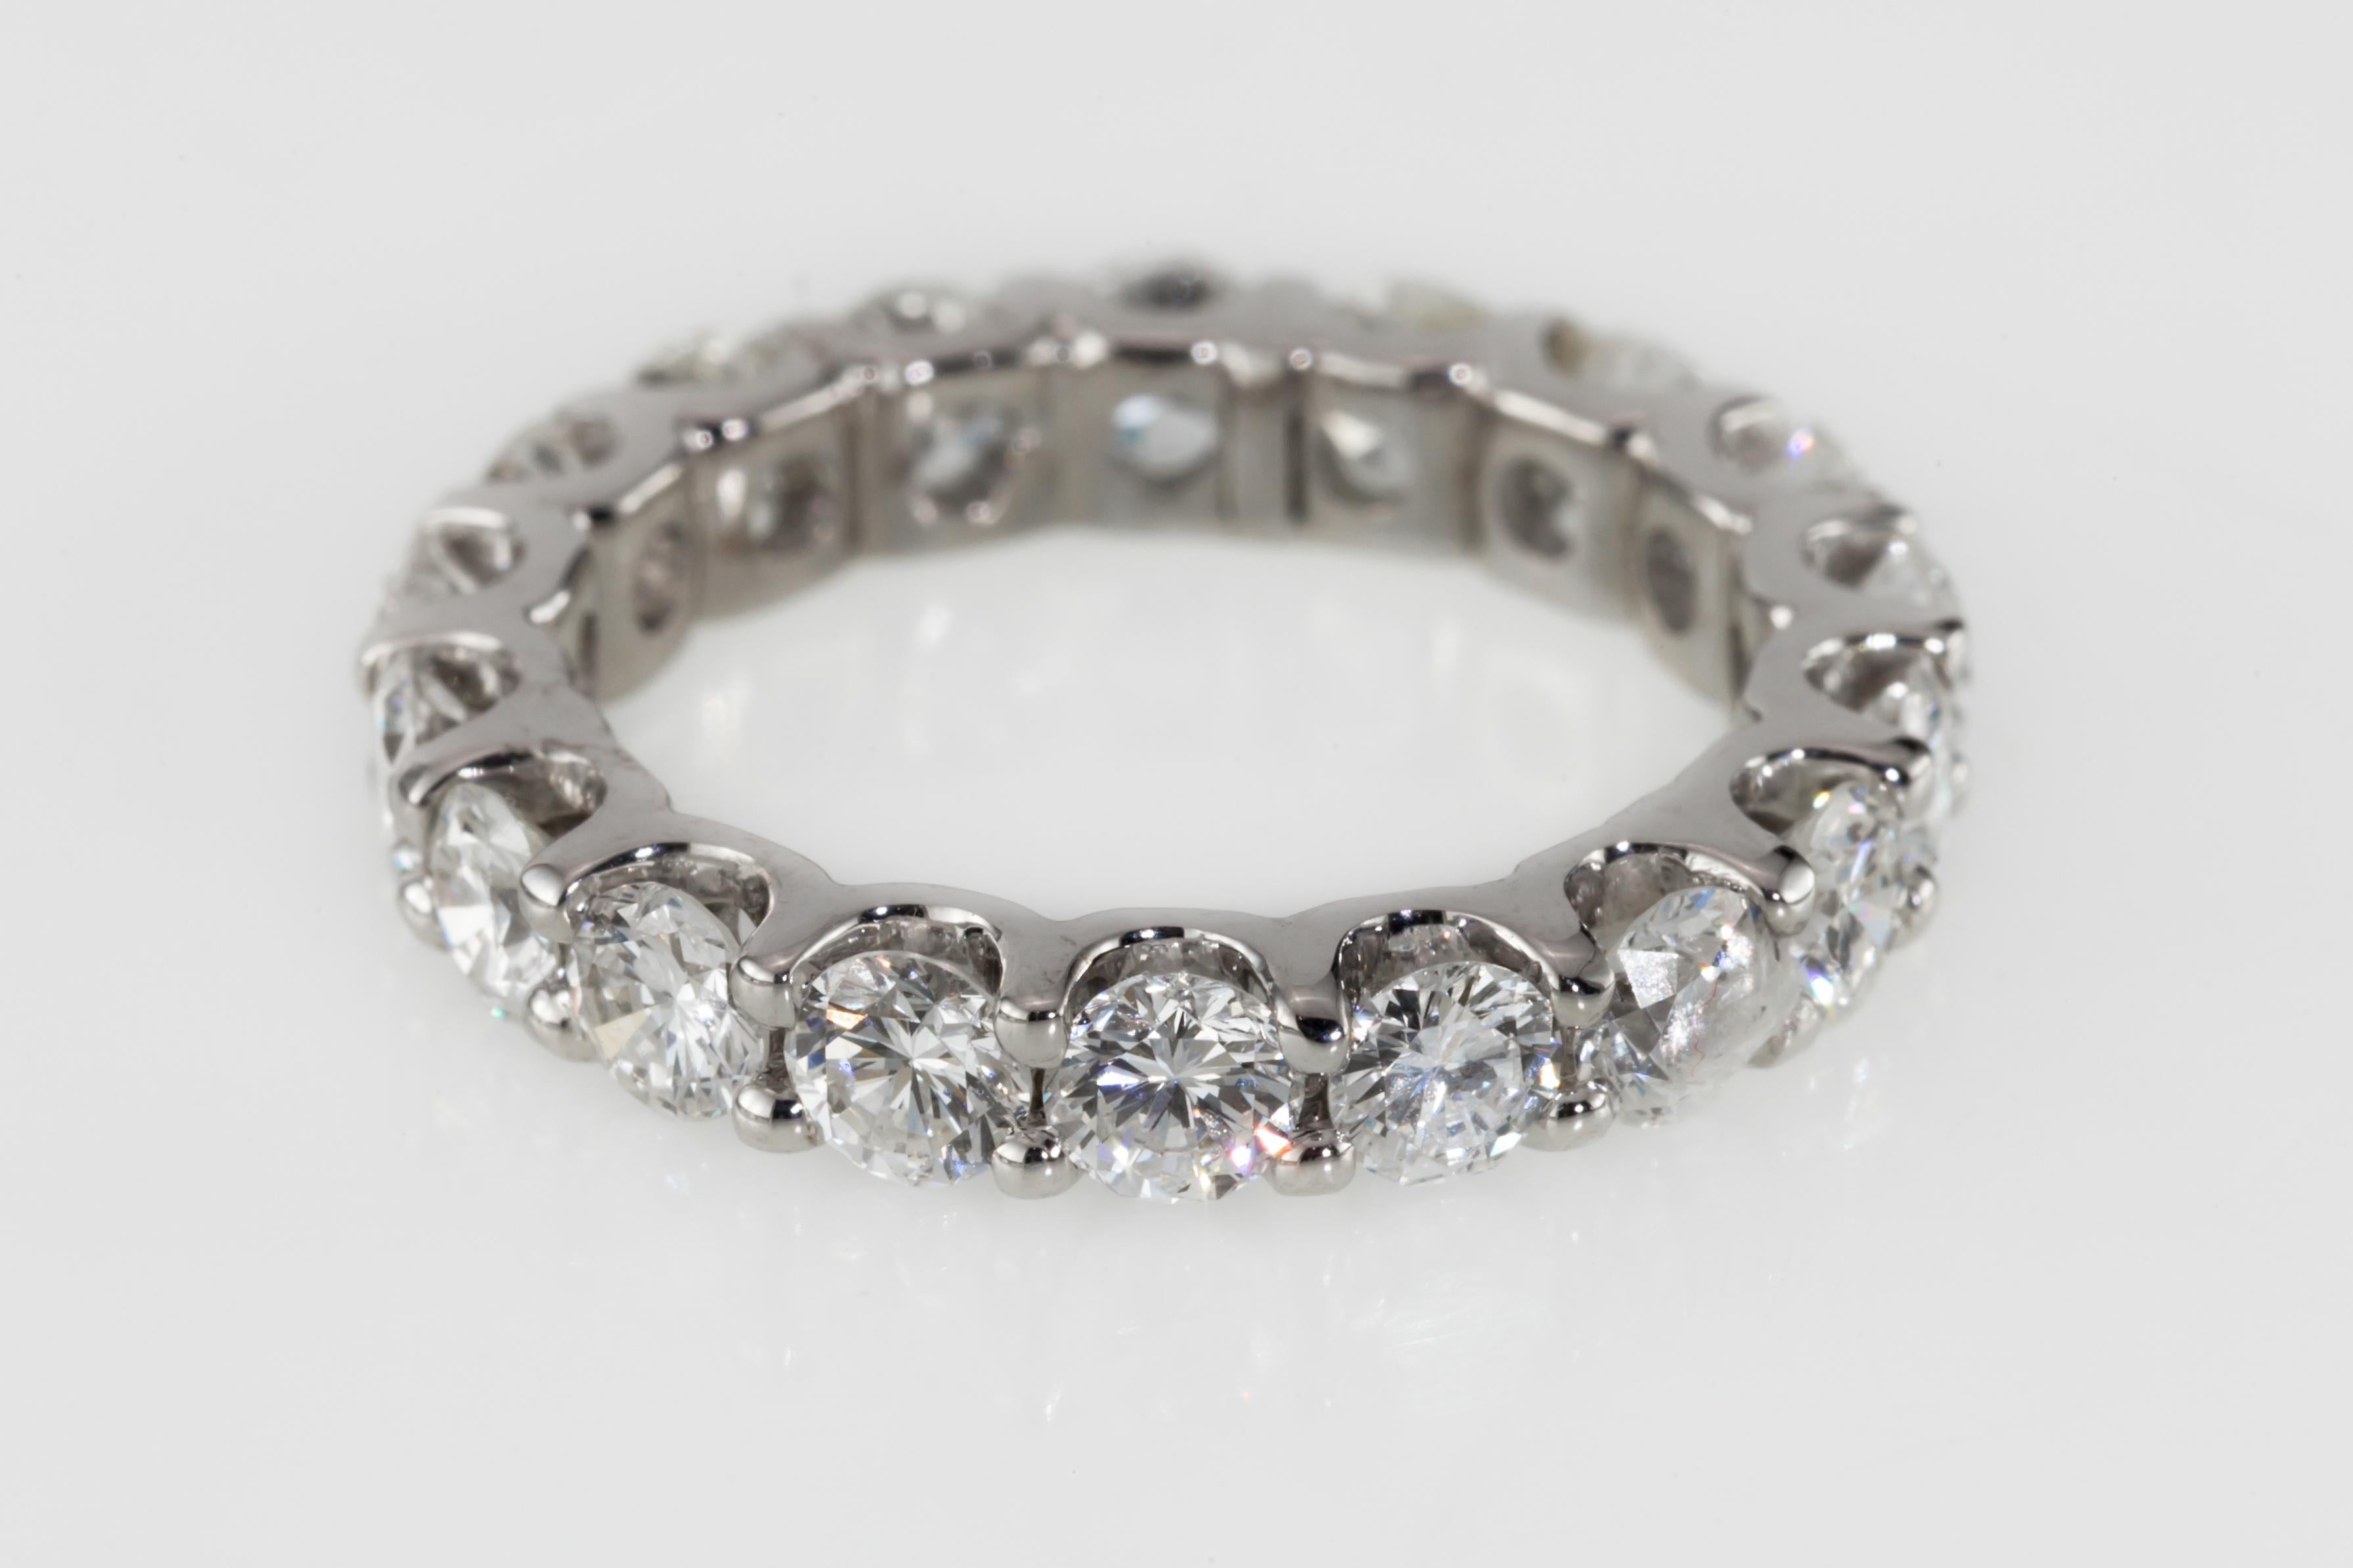 Gorgeous Round Diamond Eternity Band
US Size 5 1/4
14k White Gold U-Shaped Prong Setting
NOTE: Minor repair/resize evident on interior of band, but diamonds look good
Total Diamond Weight = 2.90 Cts (18 Diamonds Total)
Average Color = G
Average